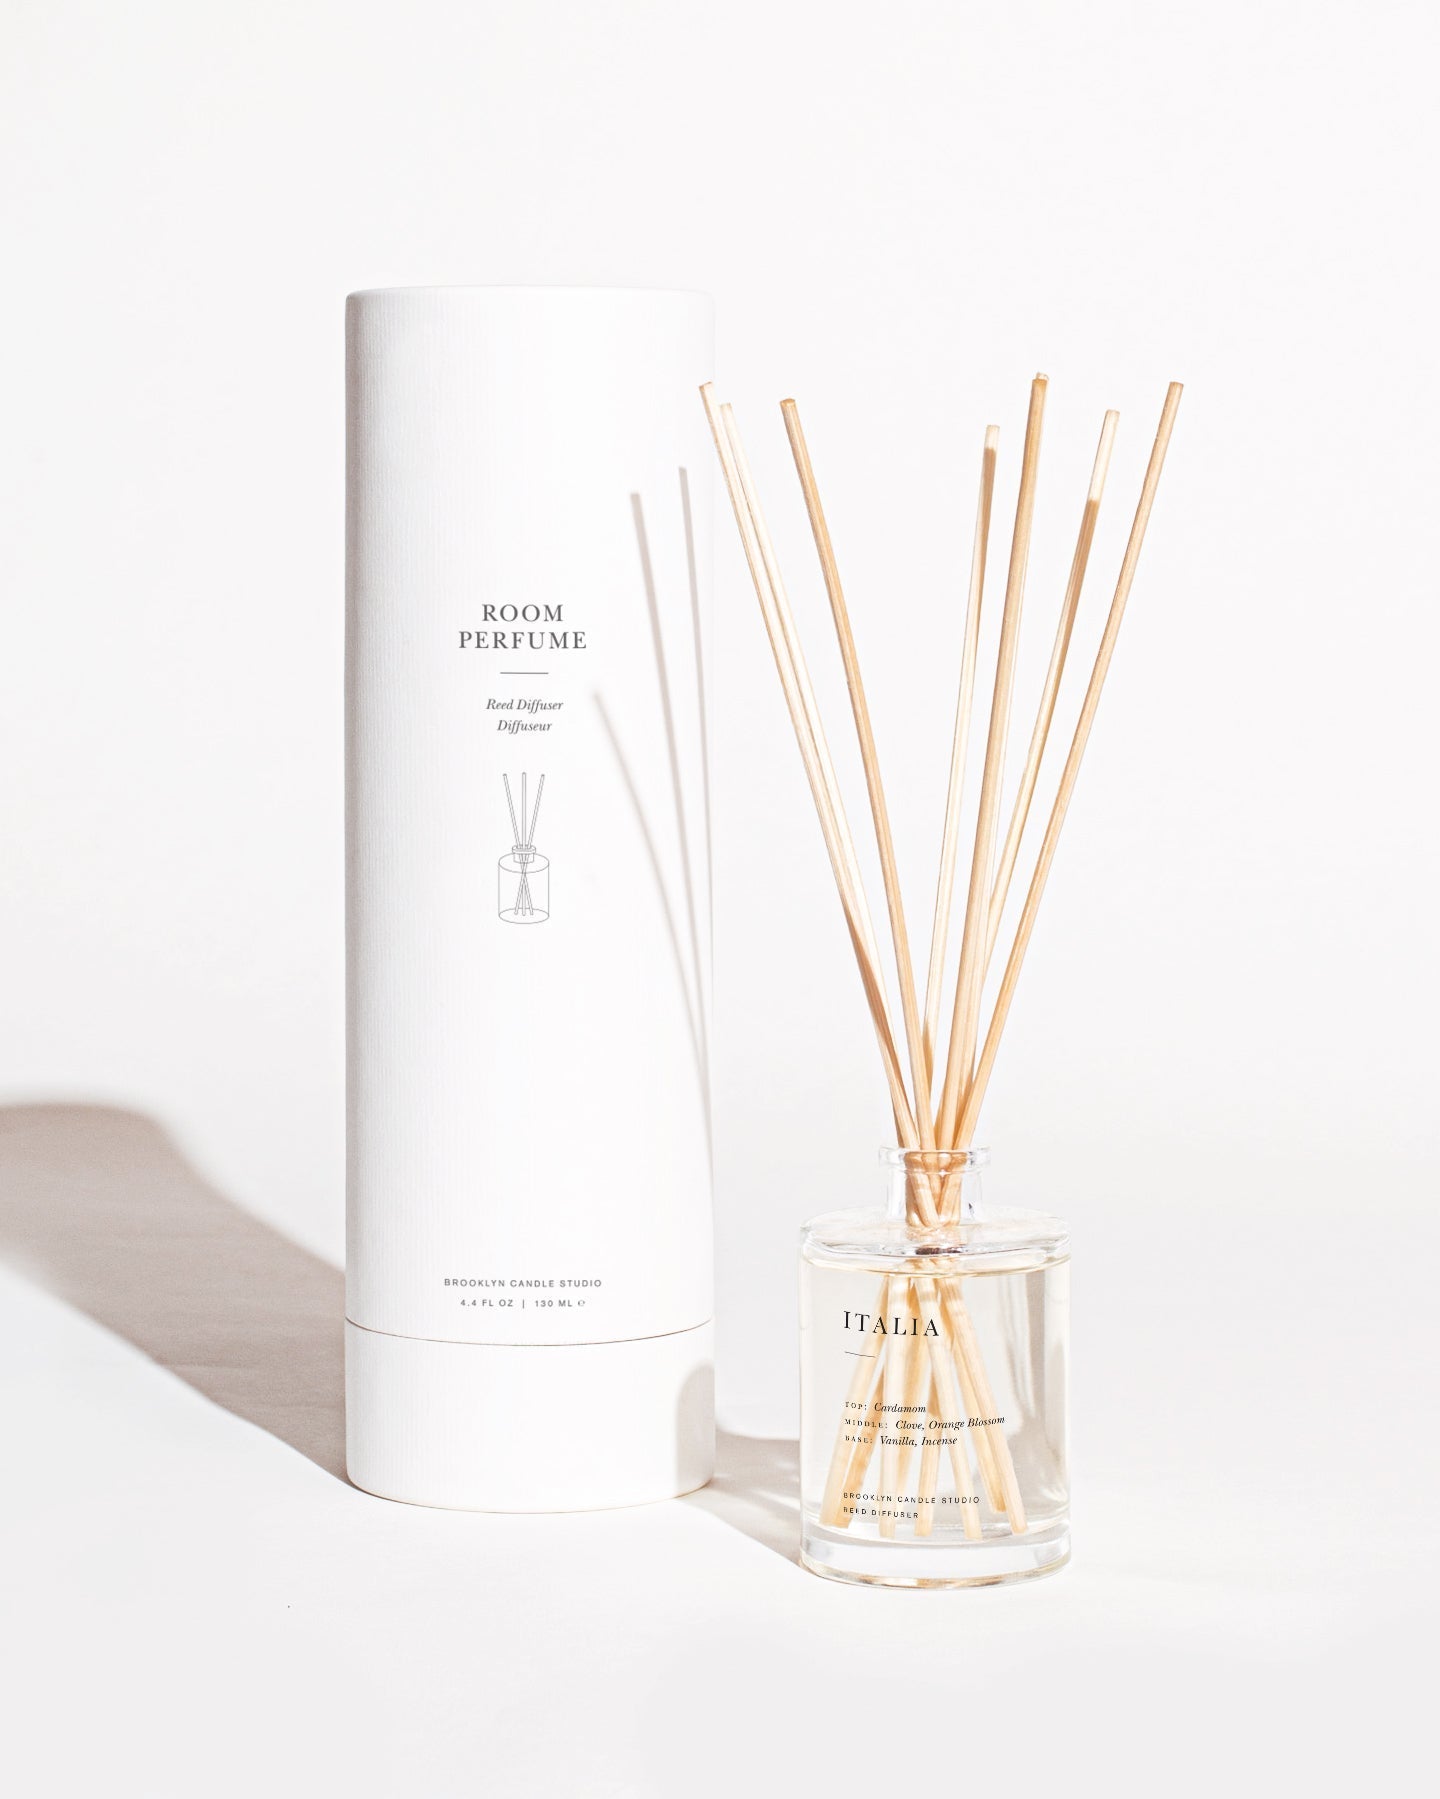 A room perfume set featuring a cylindrical white box labeled "Room Perfume" next to an open bottle of diffuser fragrance with several wooden reeds sticking out. The bottle, emblazoned with "ITALIA" in uppercase letters, emits a botanical aroma with hints of exotic spices. The background is white. This is the Italia Reed Diffuser by Brooklyn Candle Studio.